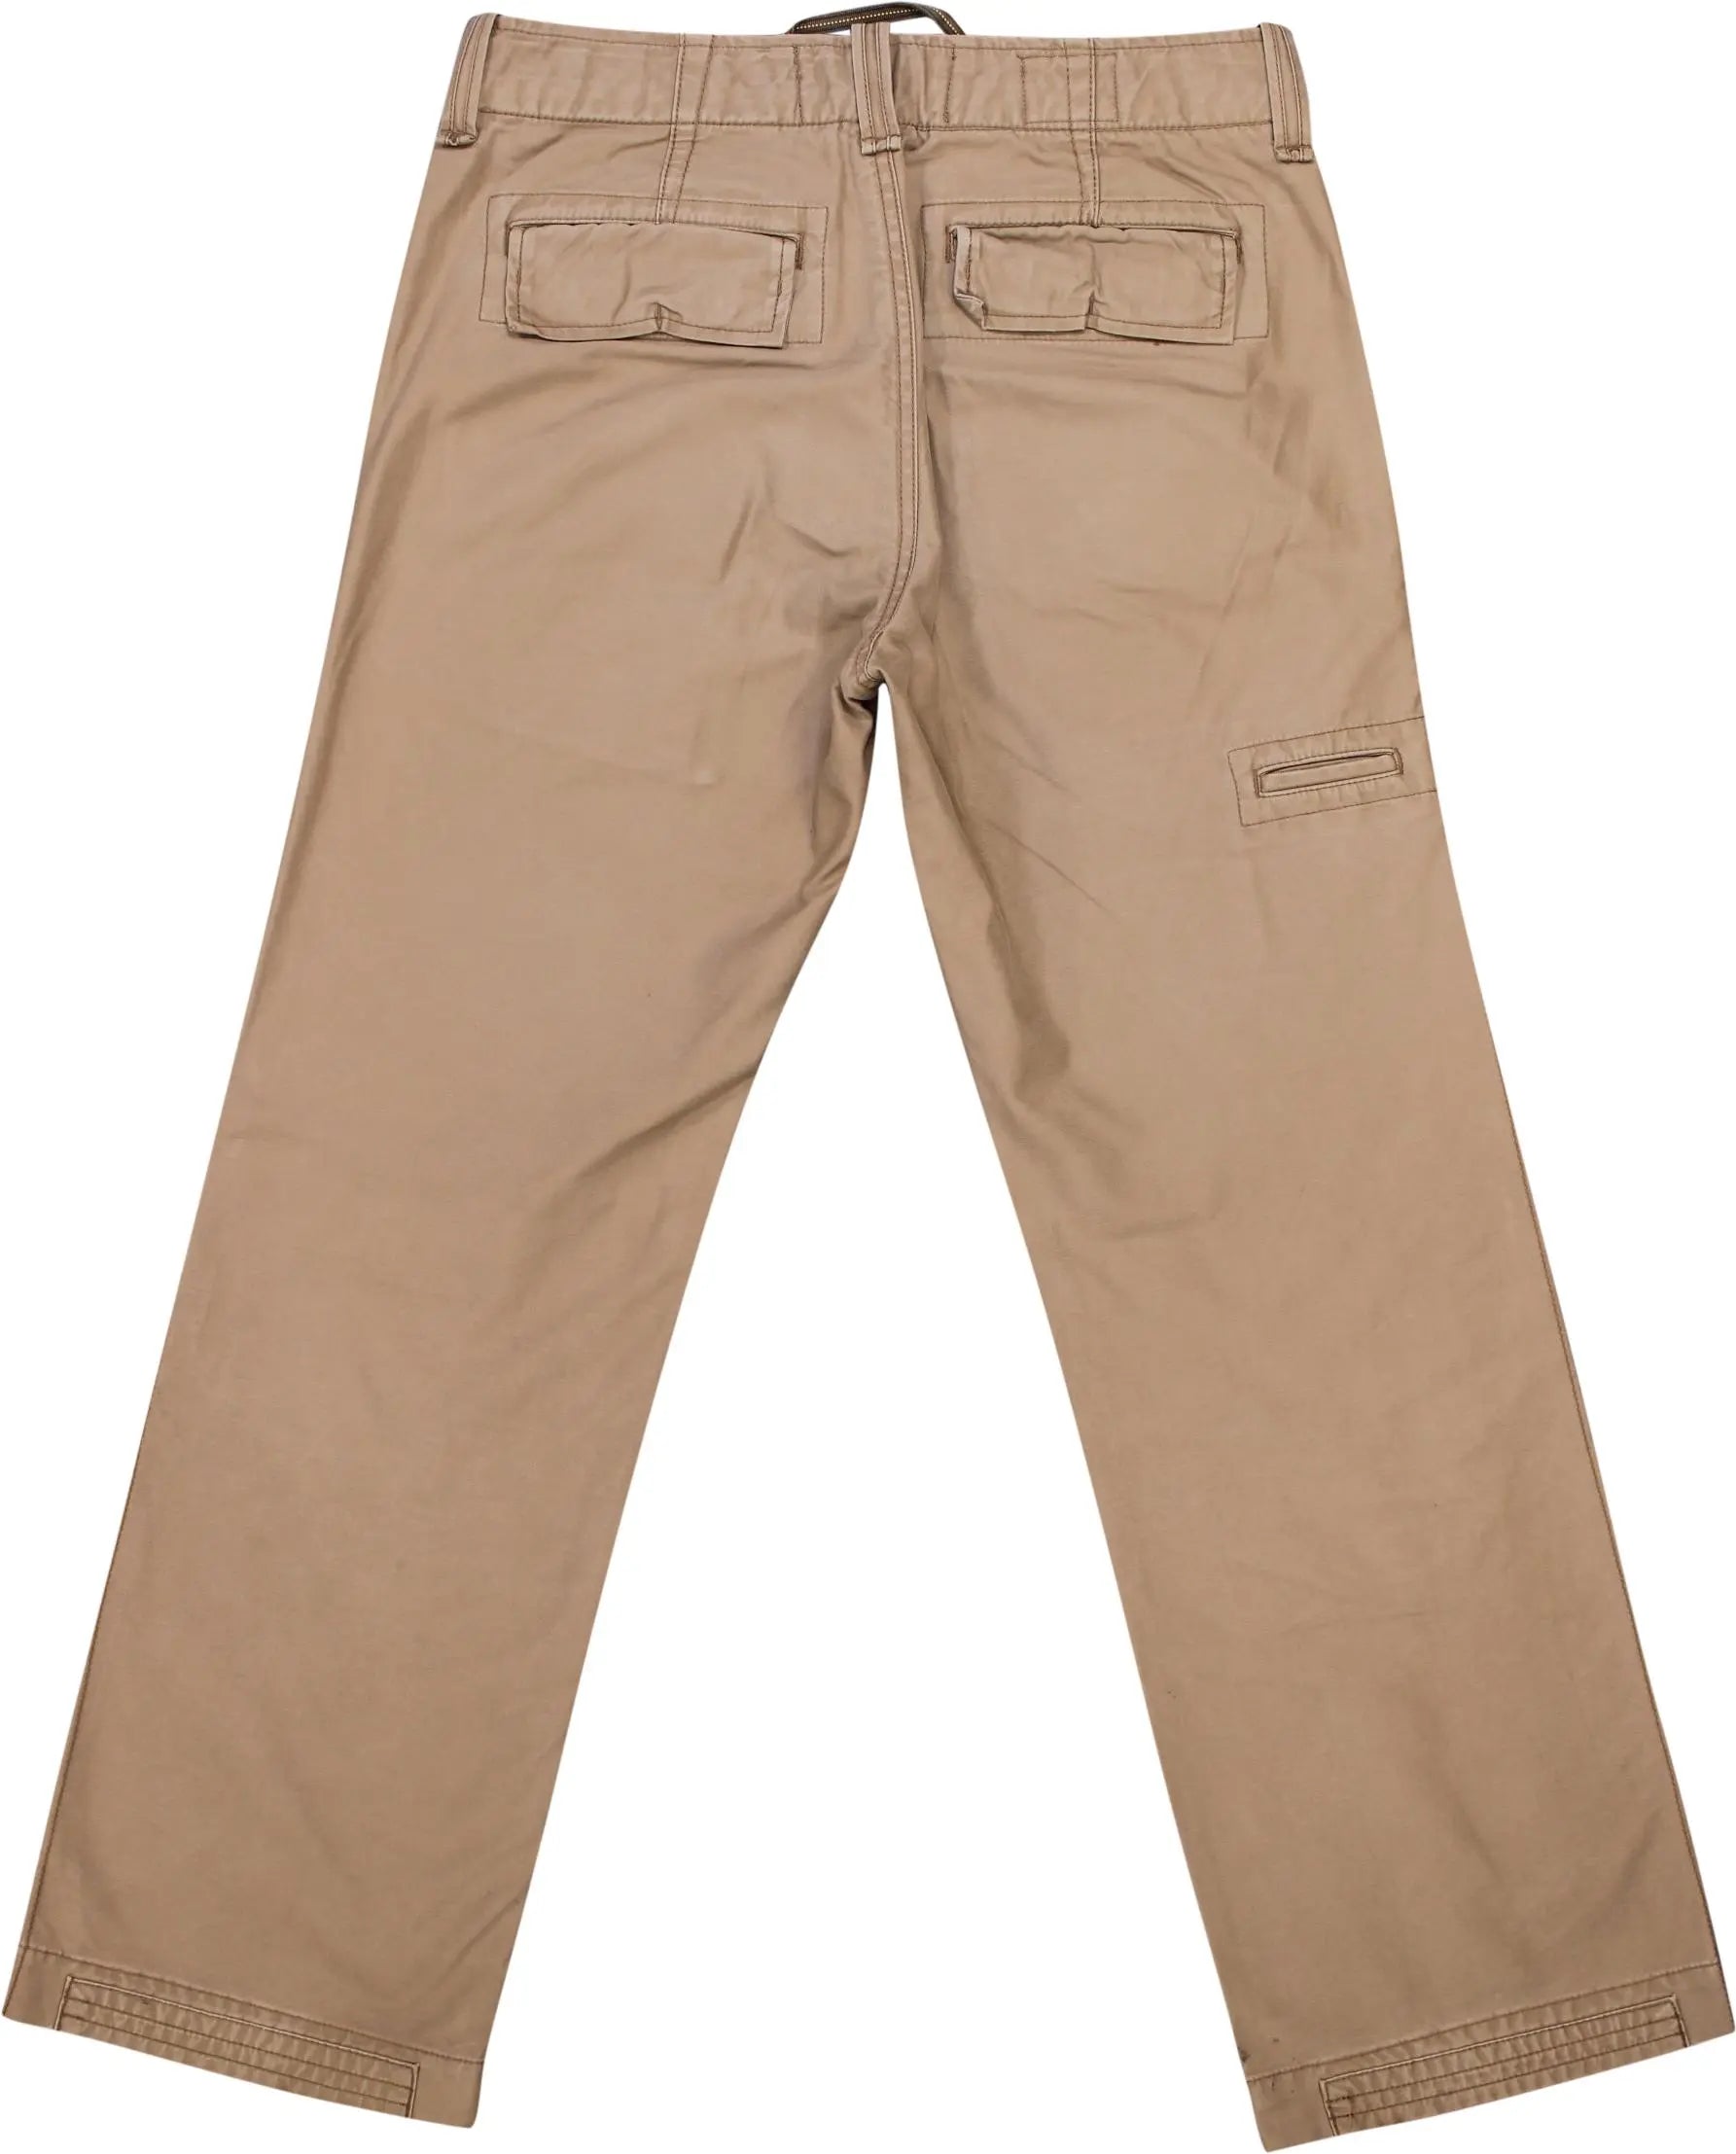 Rugged Khaki - Beige Trousers by Rugged Khaki- ThriftTale.com - Vintage and second handclothing